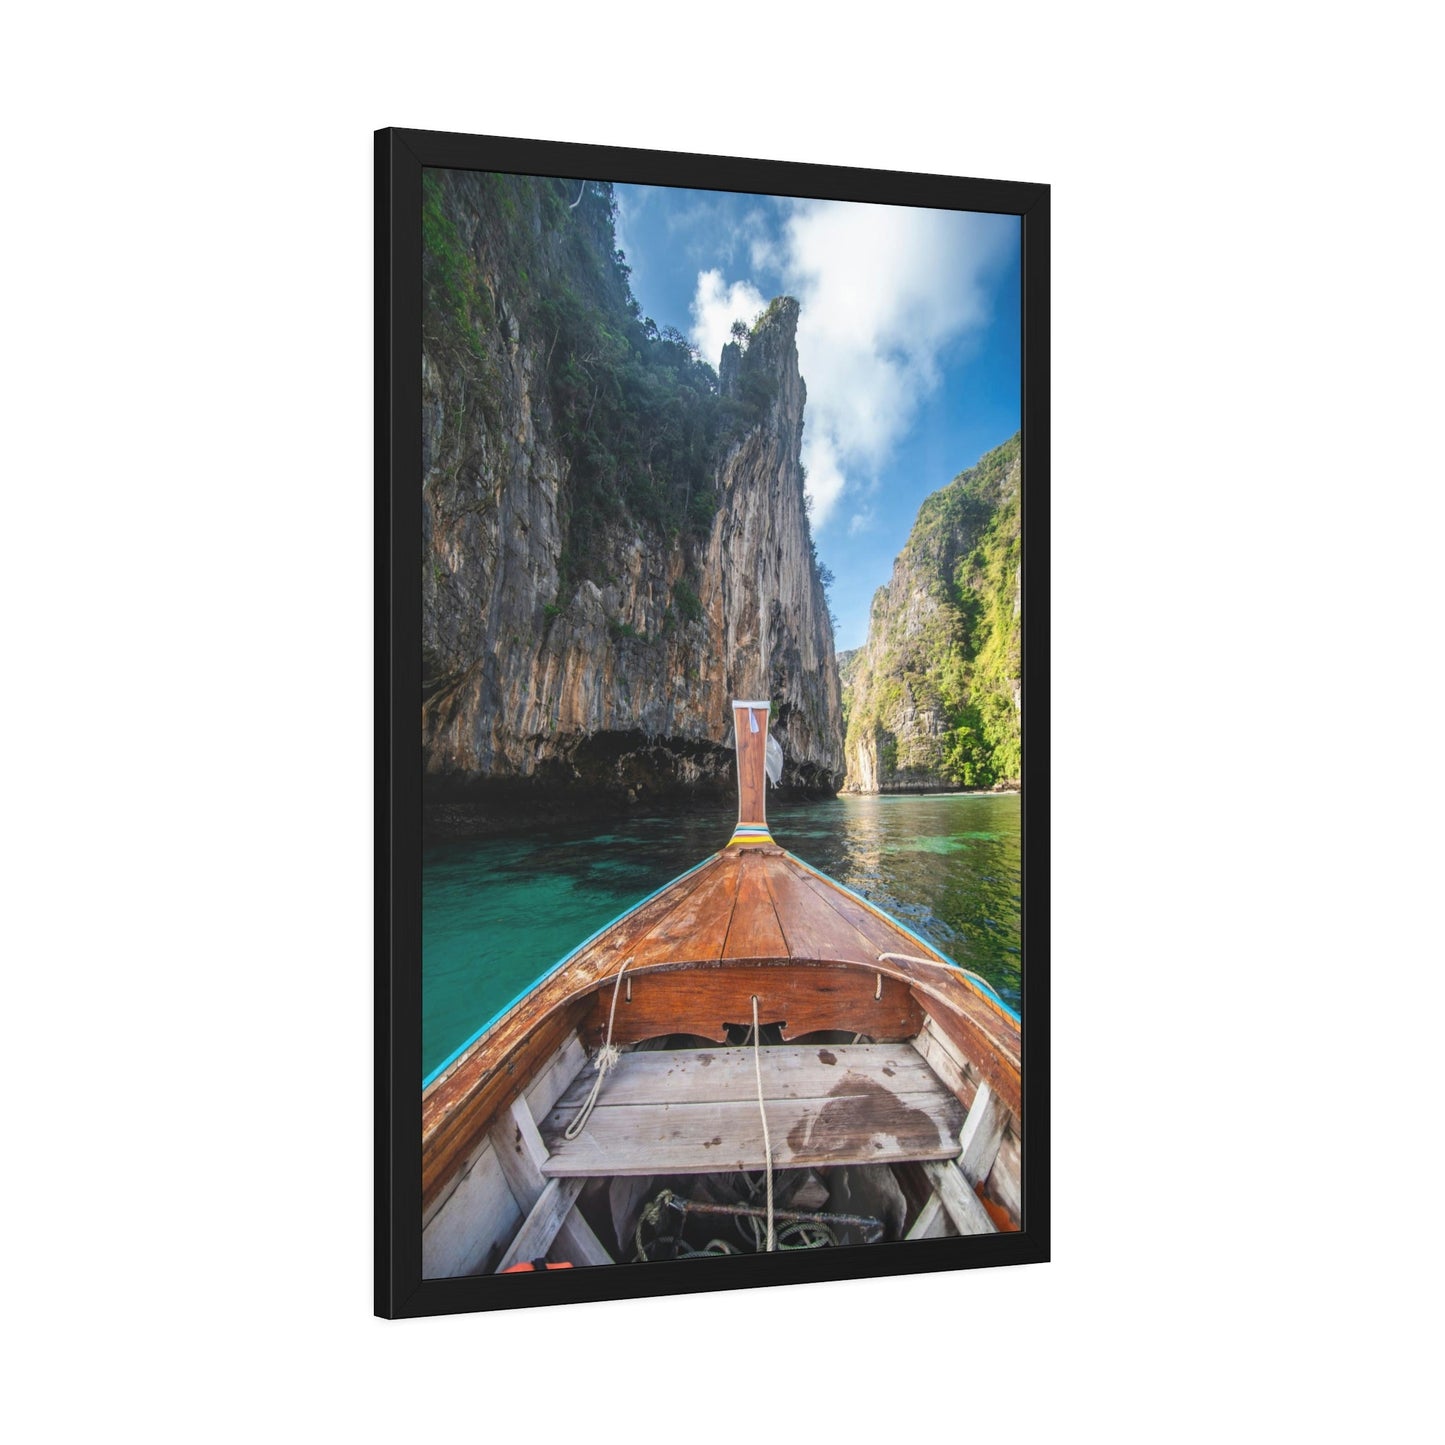 Boating Beauty: Canvas and Framed Poster with Beautiful Boating Art